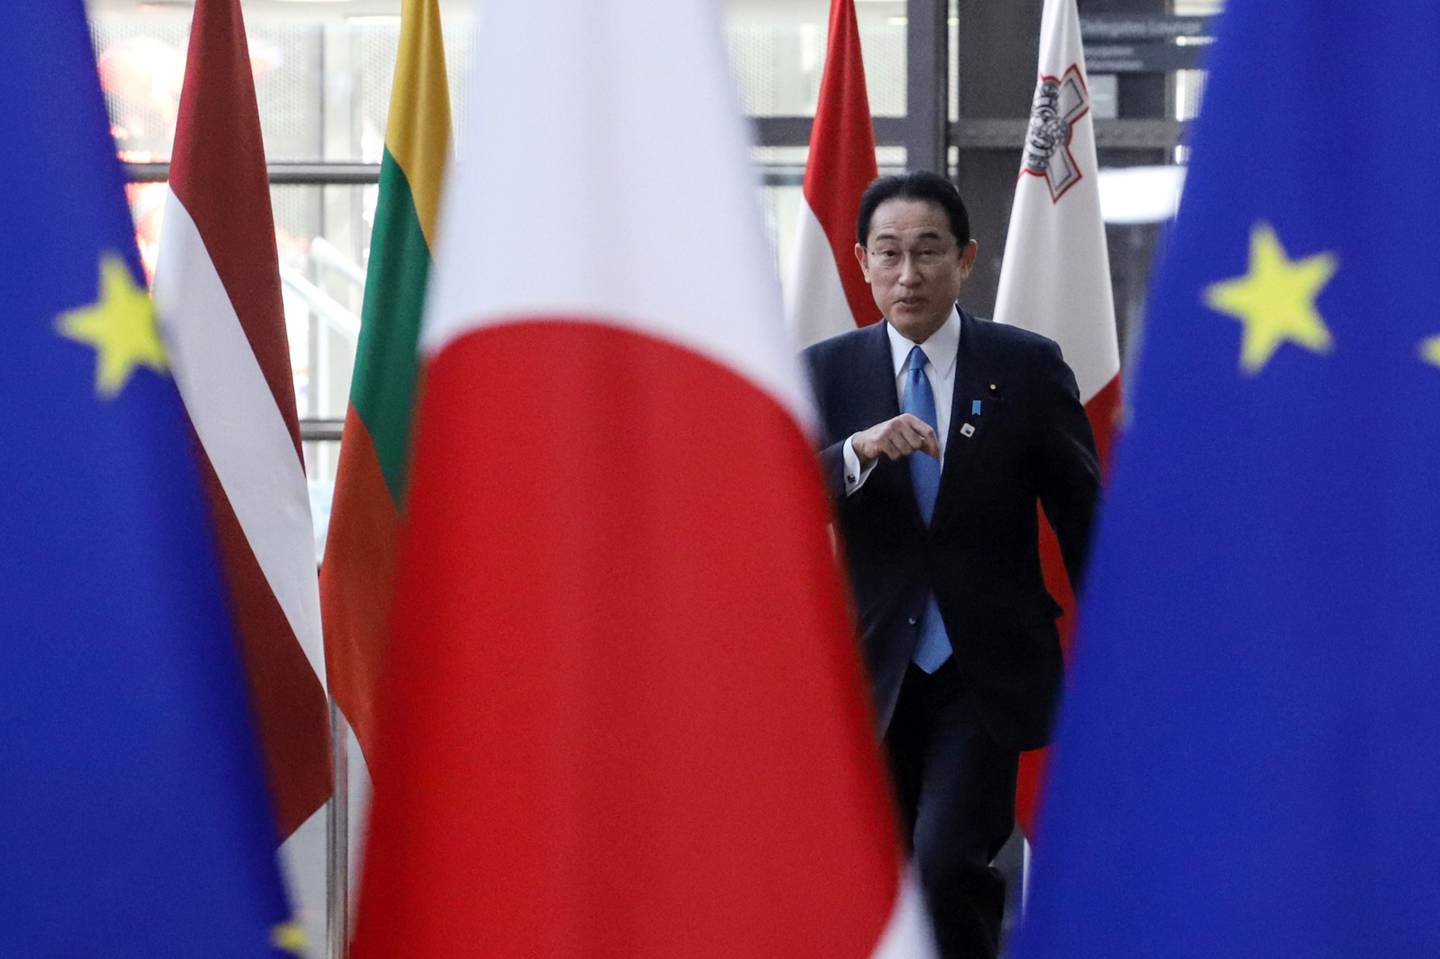 Fumio Kishida, Japan's prime minister, at the European Union (EU) Council headquarters in Brussels, Belgium, on Thursday, March 24, 2022. The world's leading economic powers plan to say that they will continue to impose "severe consequences" on Russia by fully implementing the sanctions that countries have already imposed and stand ready to apply additional measures.